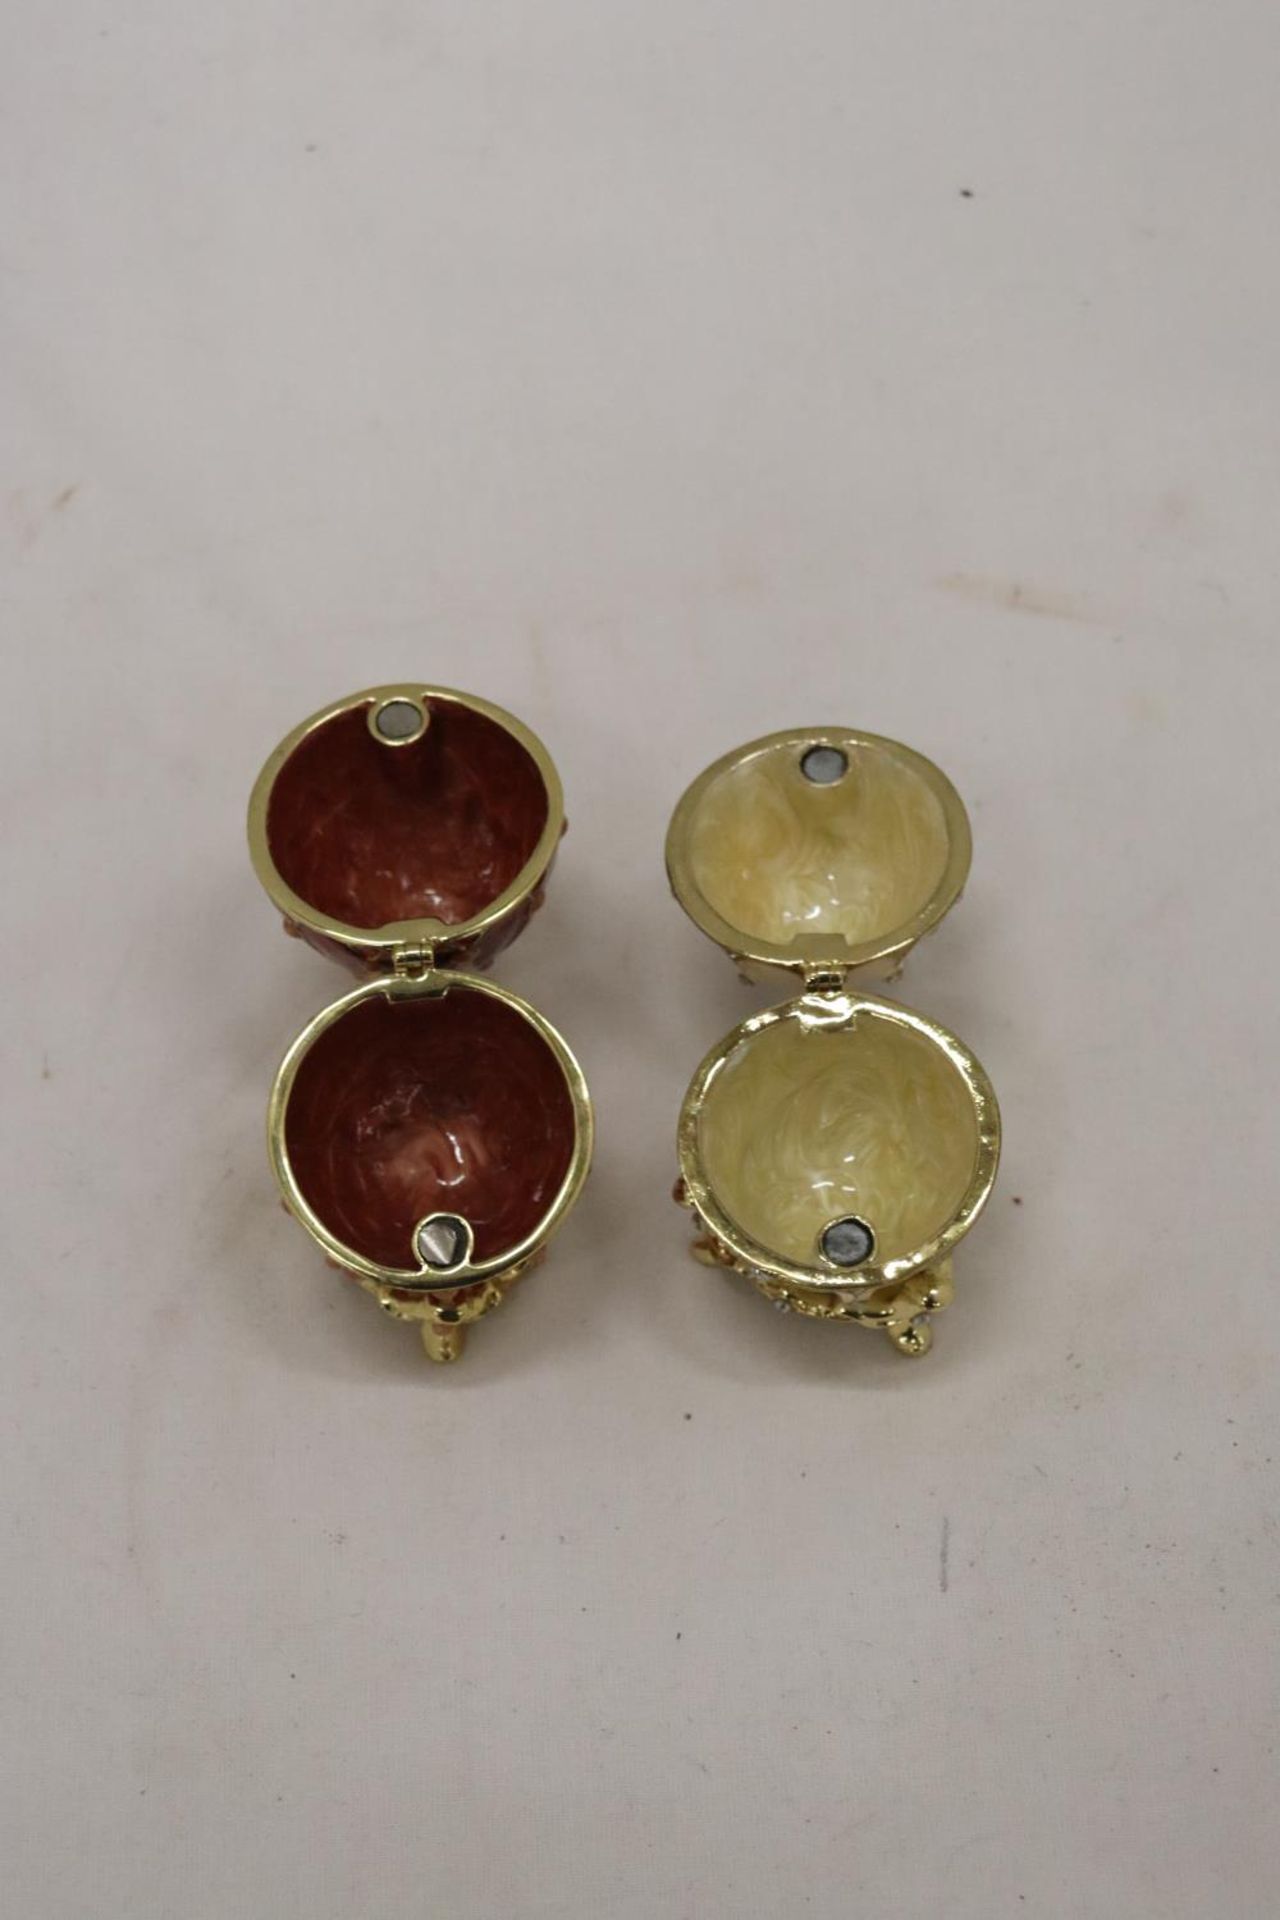 TWO DECORATIVE ENAMELLED EGG TRINKET BOXES ON STANDS - Image 5 of 6